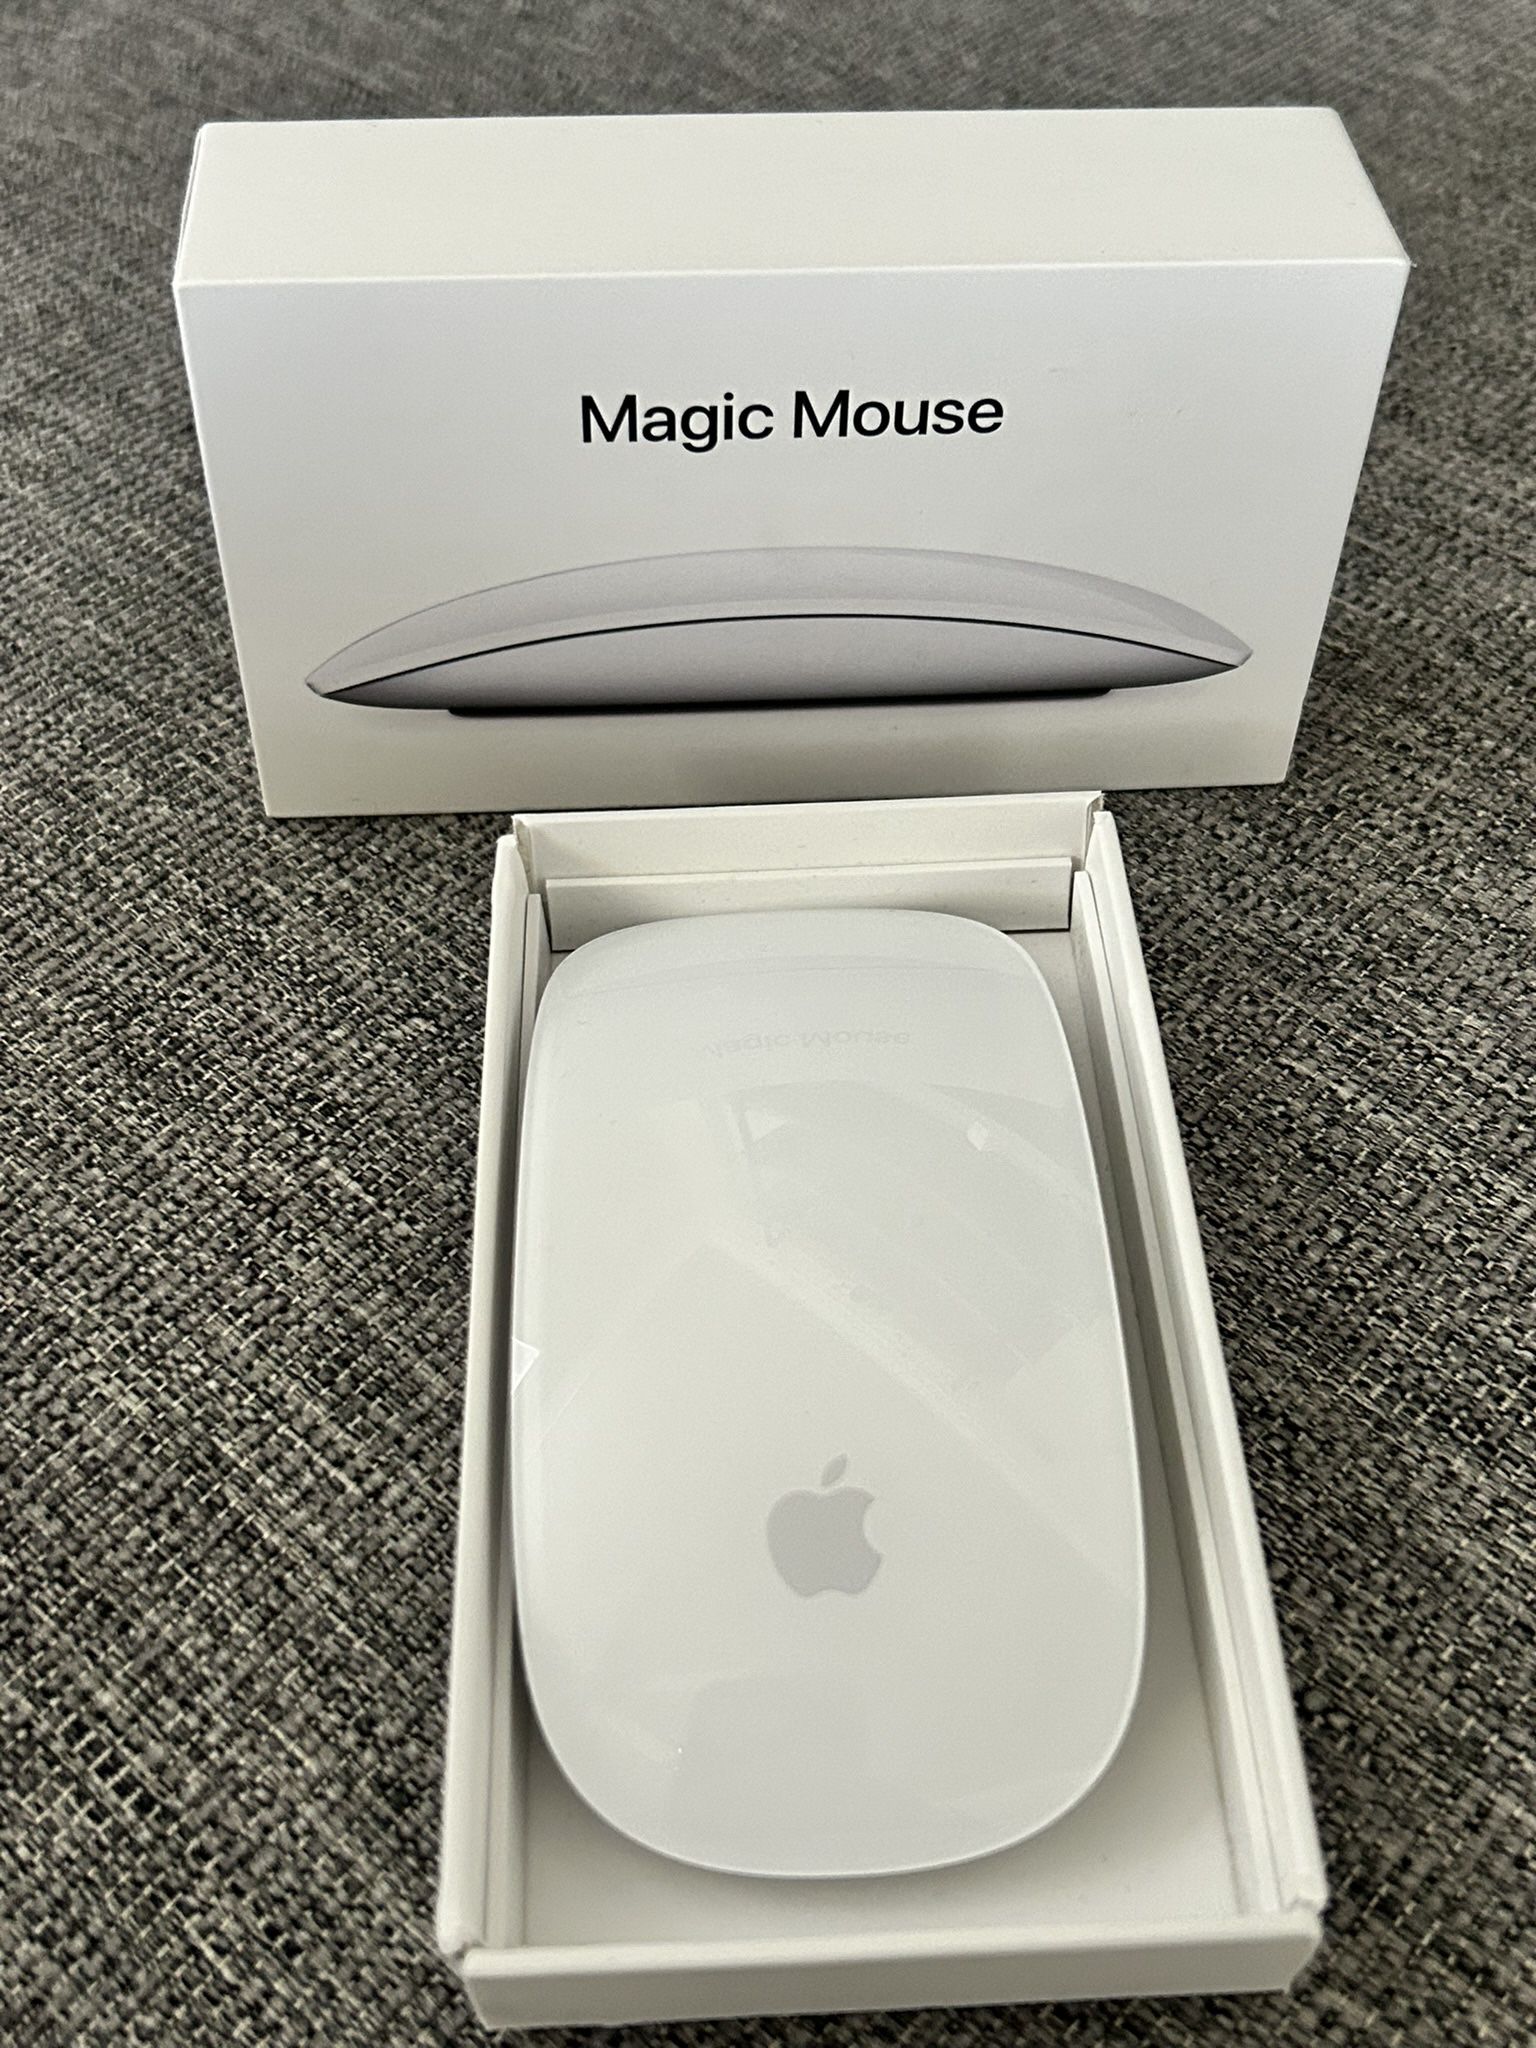 Apple Mouse 2 , Like New!! $60 Firm!! 